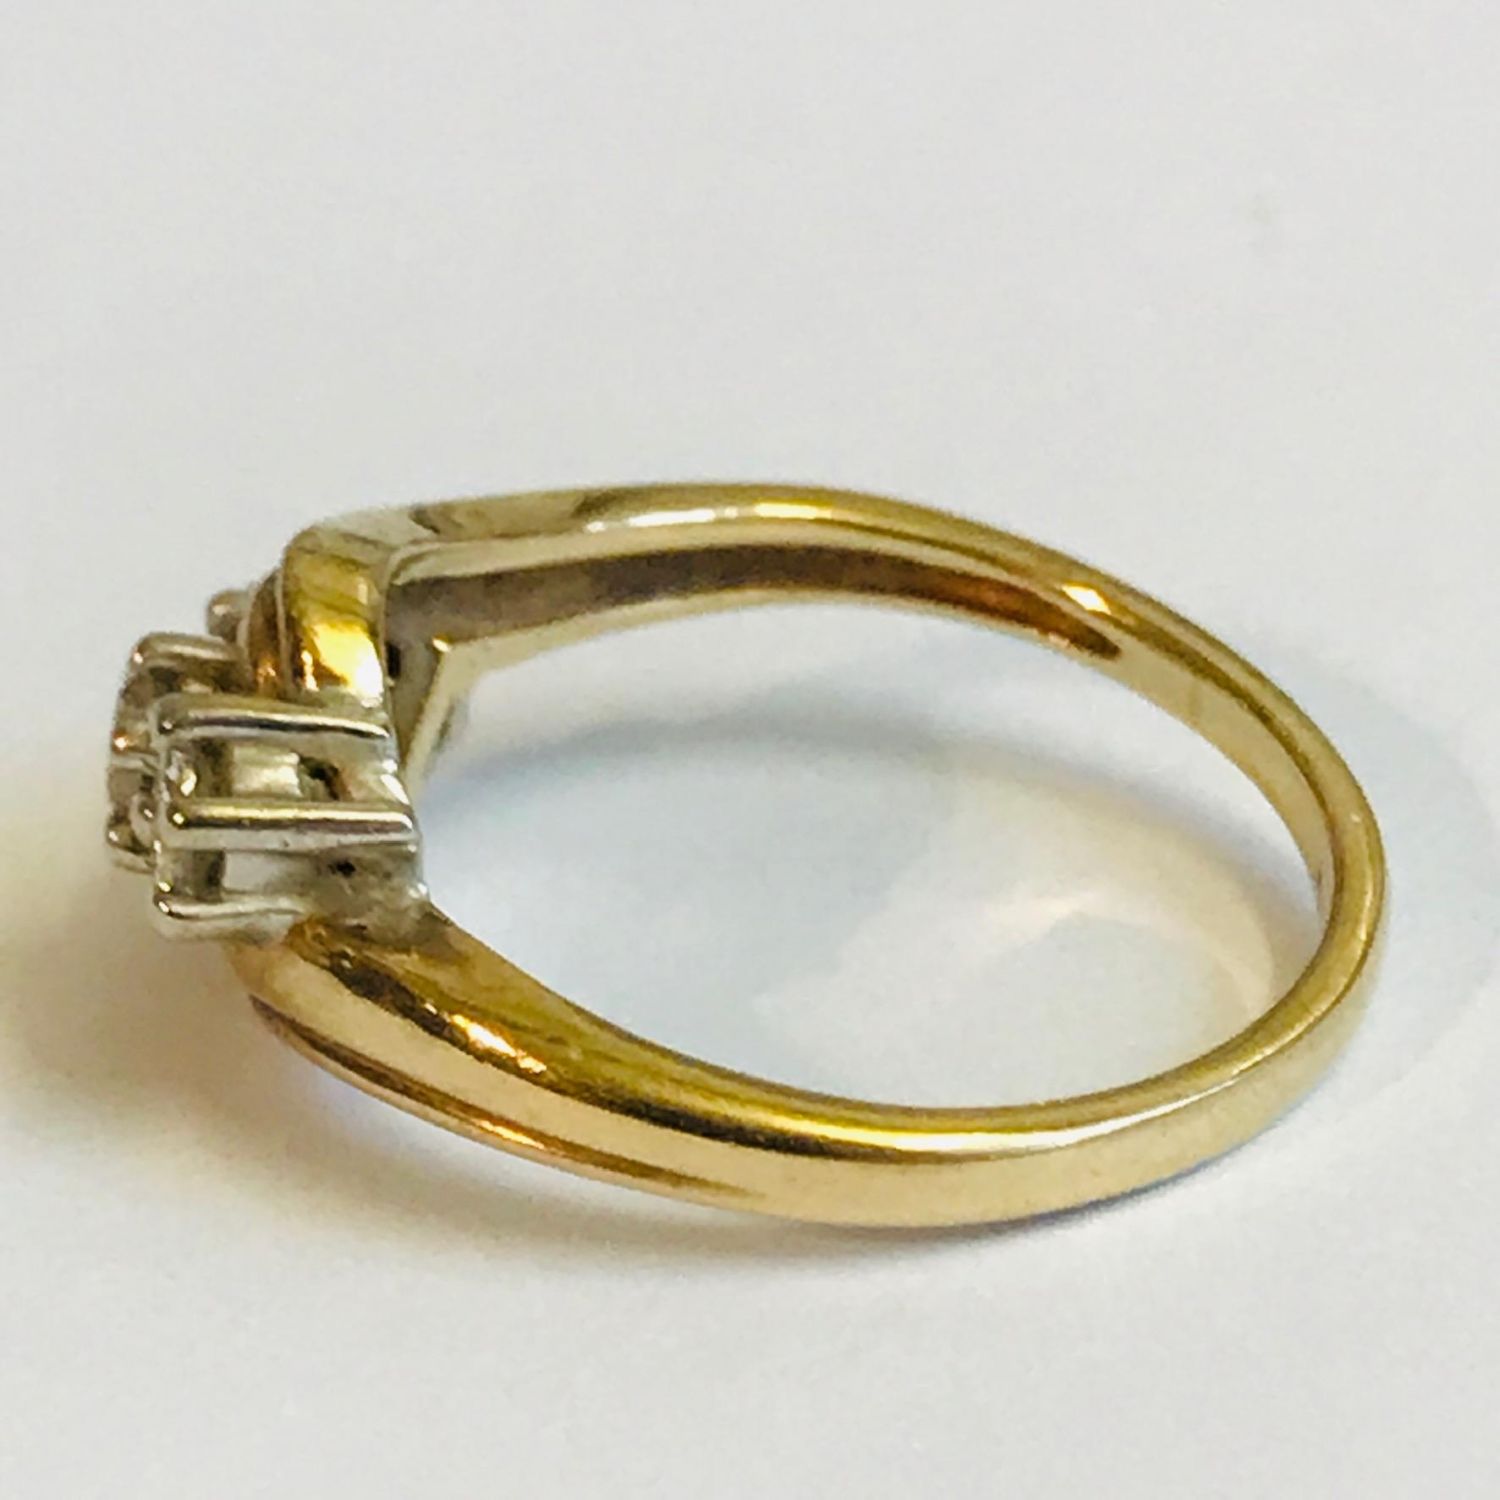 9ct Gold 3 Stone Diamond Ring - Jewellery & Gold - Hemswell Antique Centres